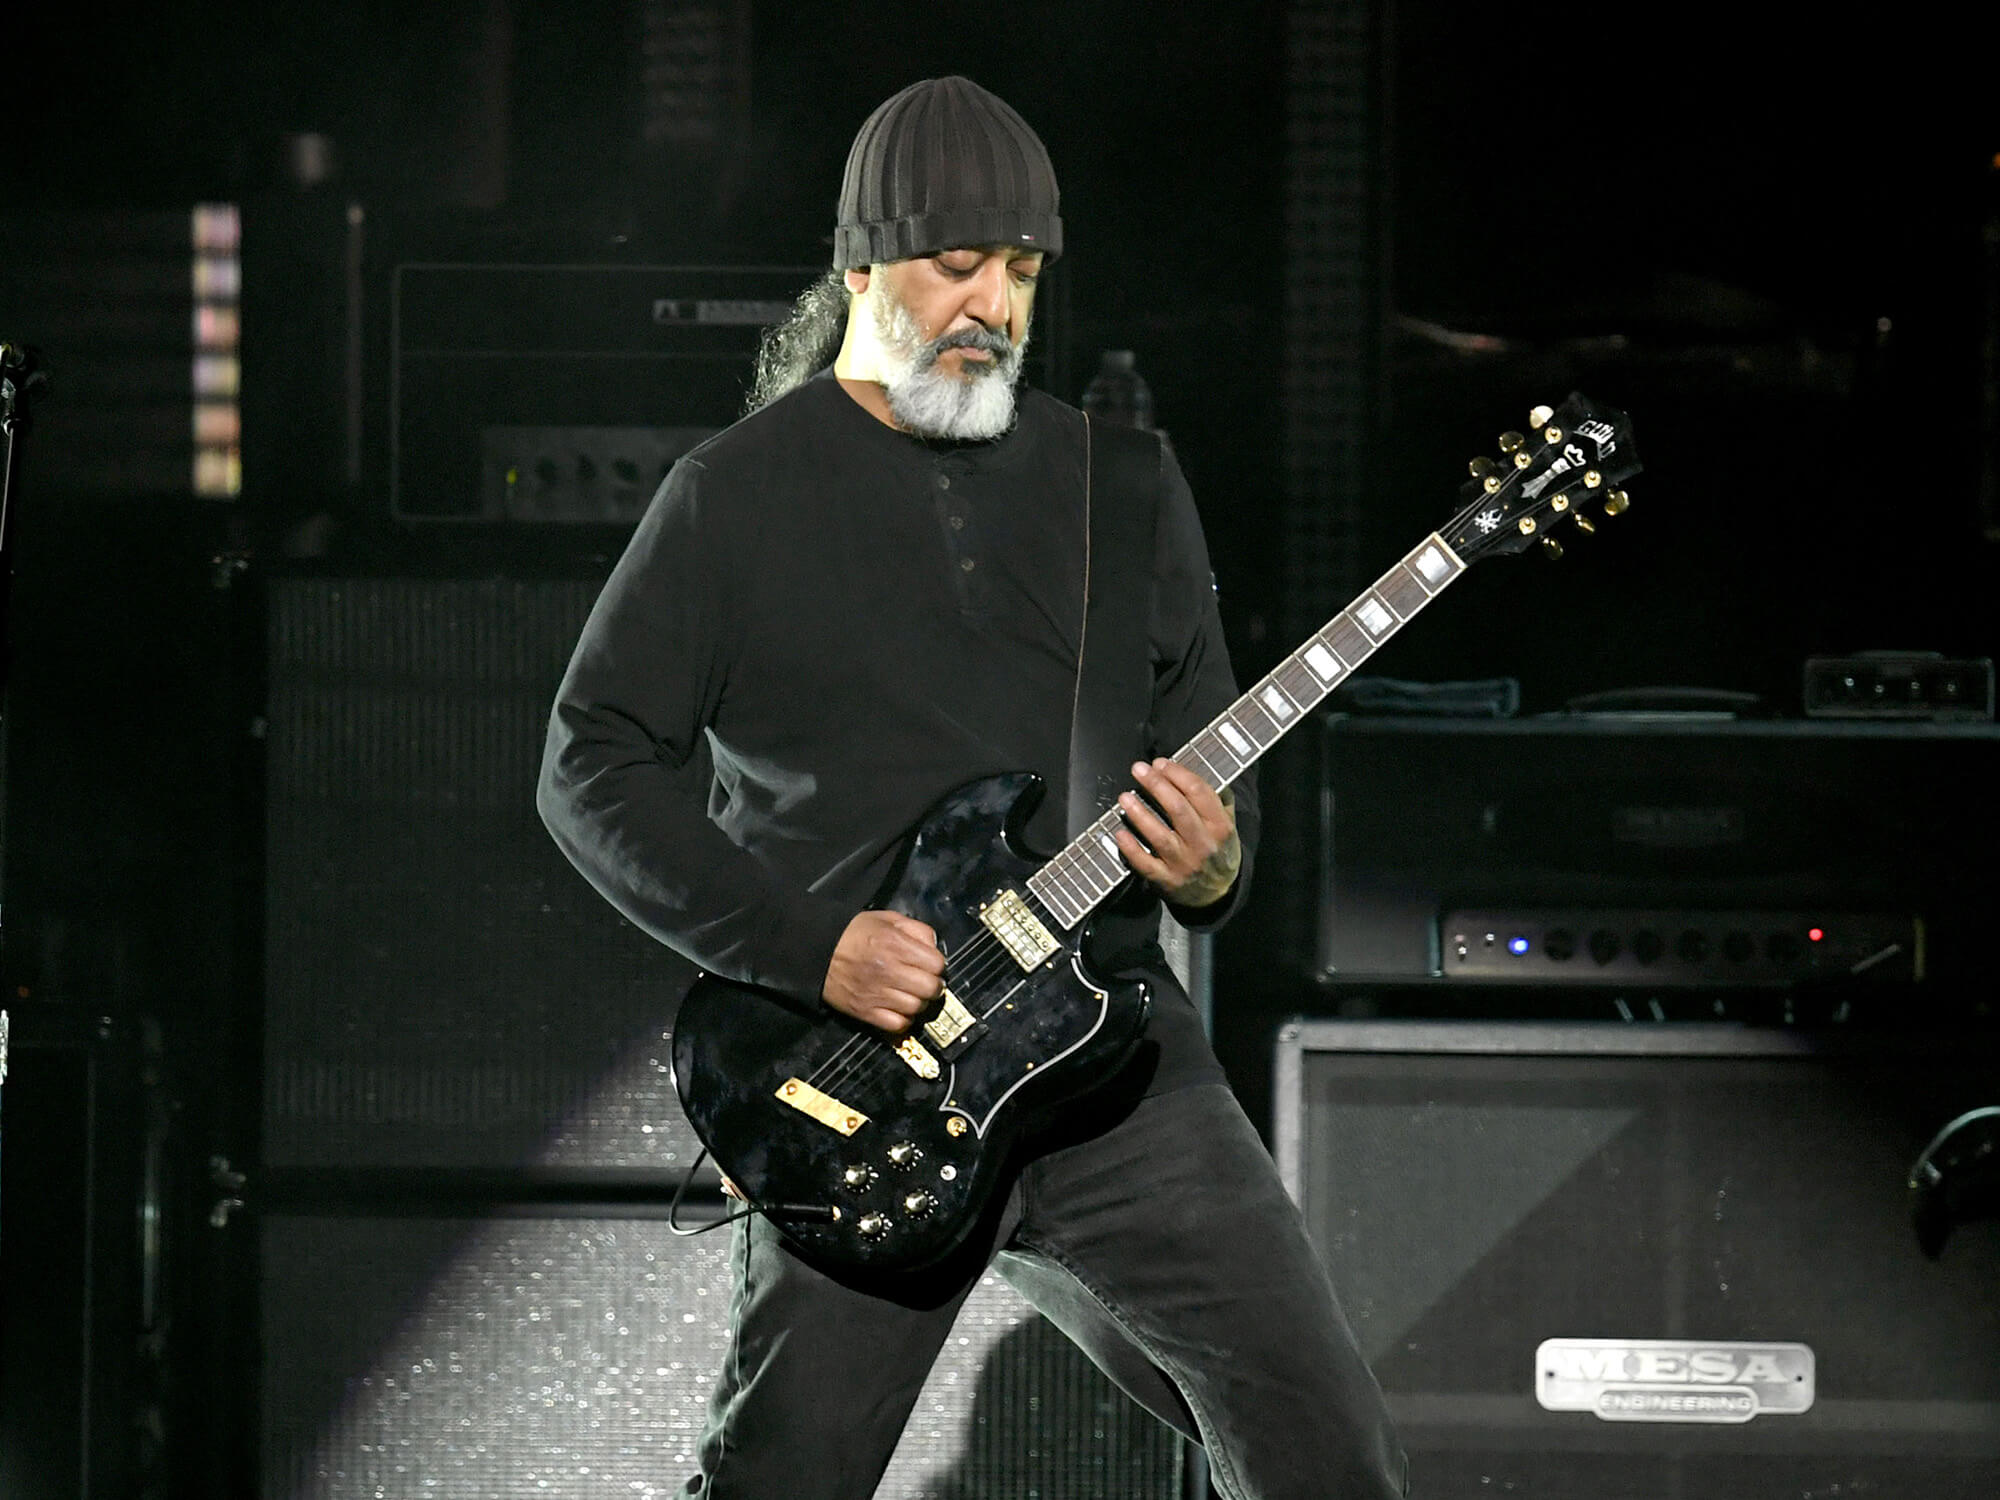 Kim Thayil on stage. He's playing a Guild guitar and is wearing all-black.